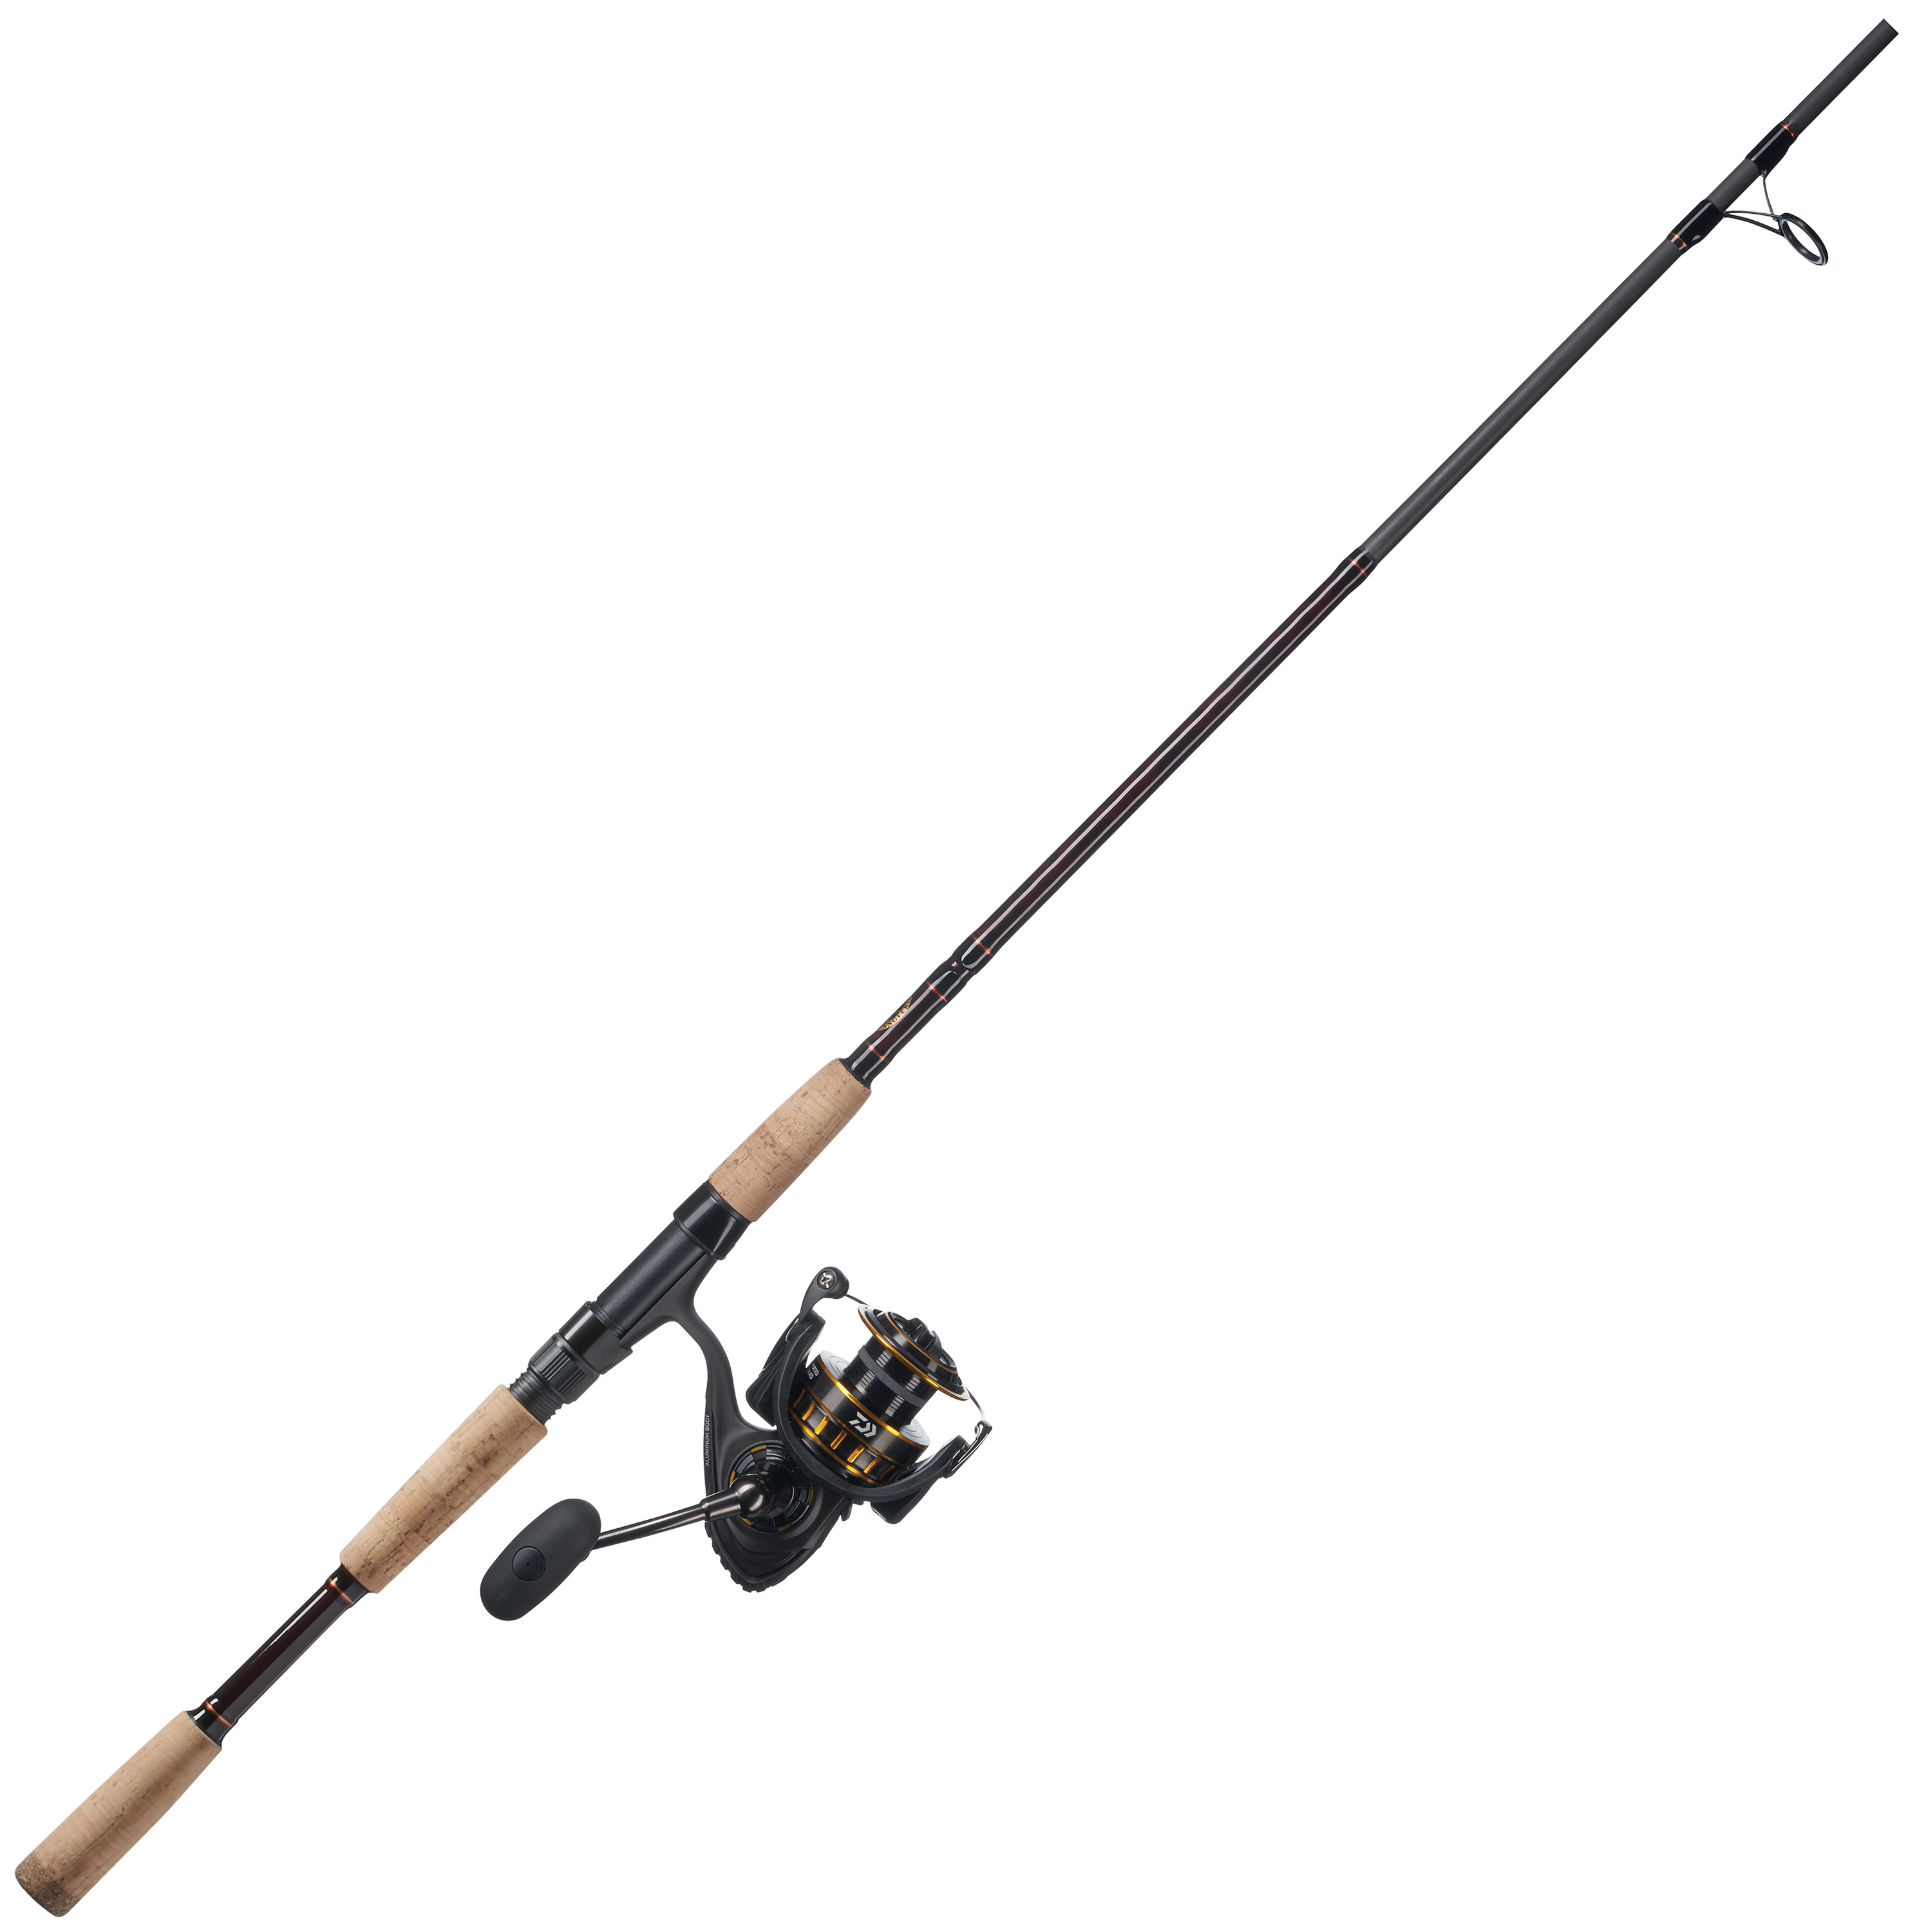 Daiwa BG/Offshore Angler Gold Cup Inshore Spinning Combo